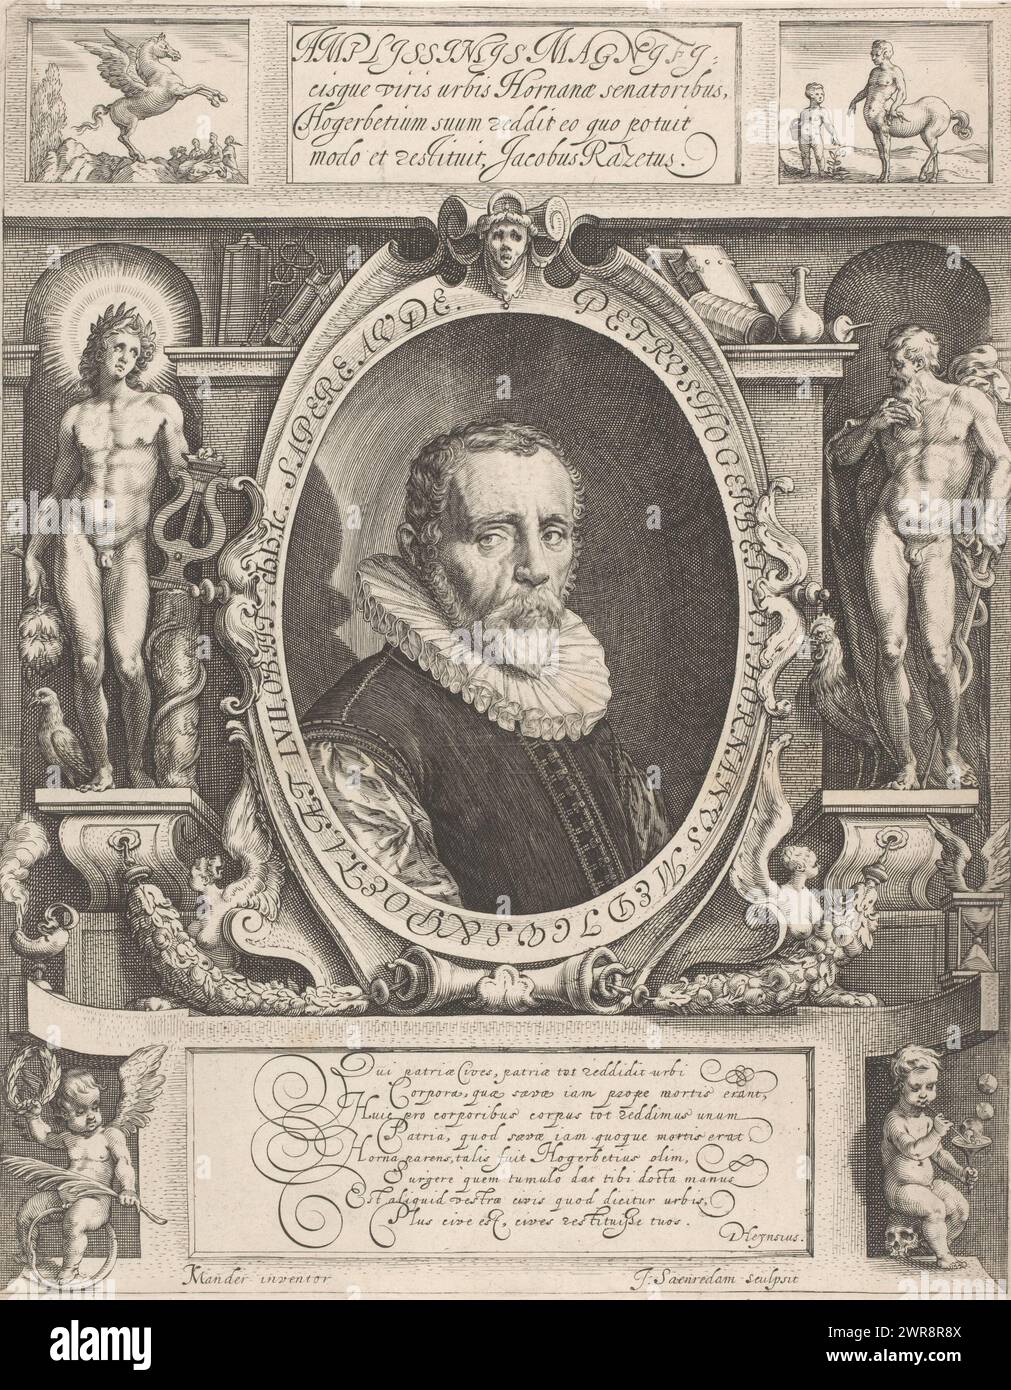 Portrait of Petrus Hogerbeets, Bust to the right of the doctor and poet Petrus Hogerbeets in an oval frame with a Latin border text, which contains information about the sitter. On the left, Apollo stands as Apollo Medicus on a console near a column with a snake. He is holding a harp. A crow near his right foot, which should have watched over Coronis. On the right, Aesculapius stands with a rooster on a console. He is holding an esculapian. Above the list of medical instruments and books. Top left Pegasus giving rise to the Hippocrene. On the right the young Aesculapius with the centaur Chiron Stock Photo